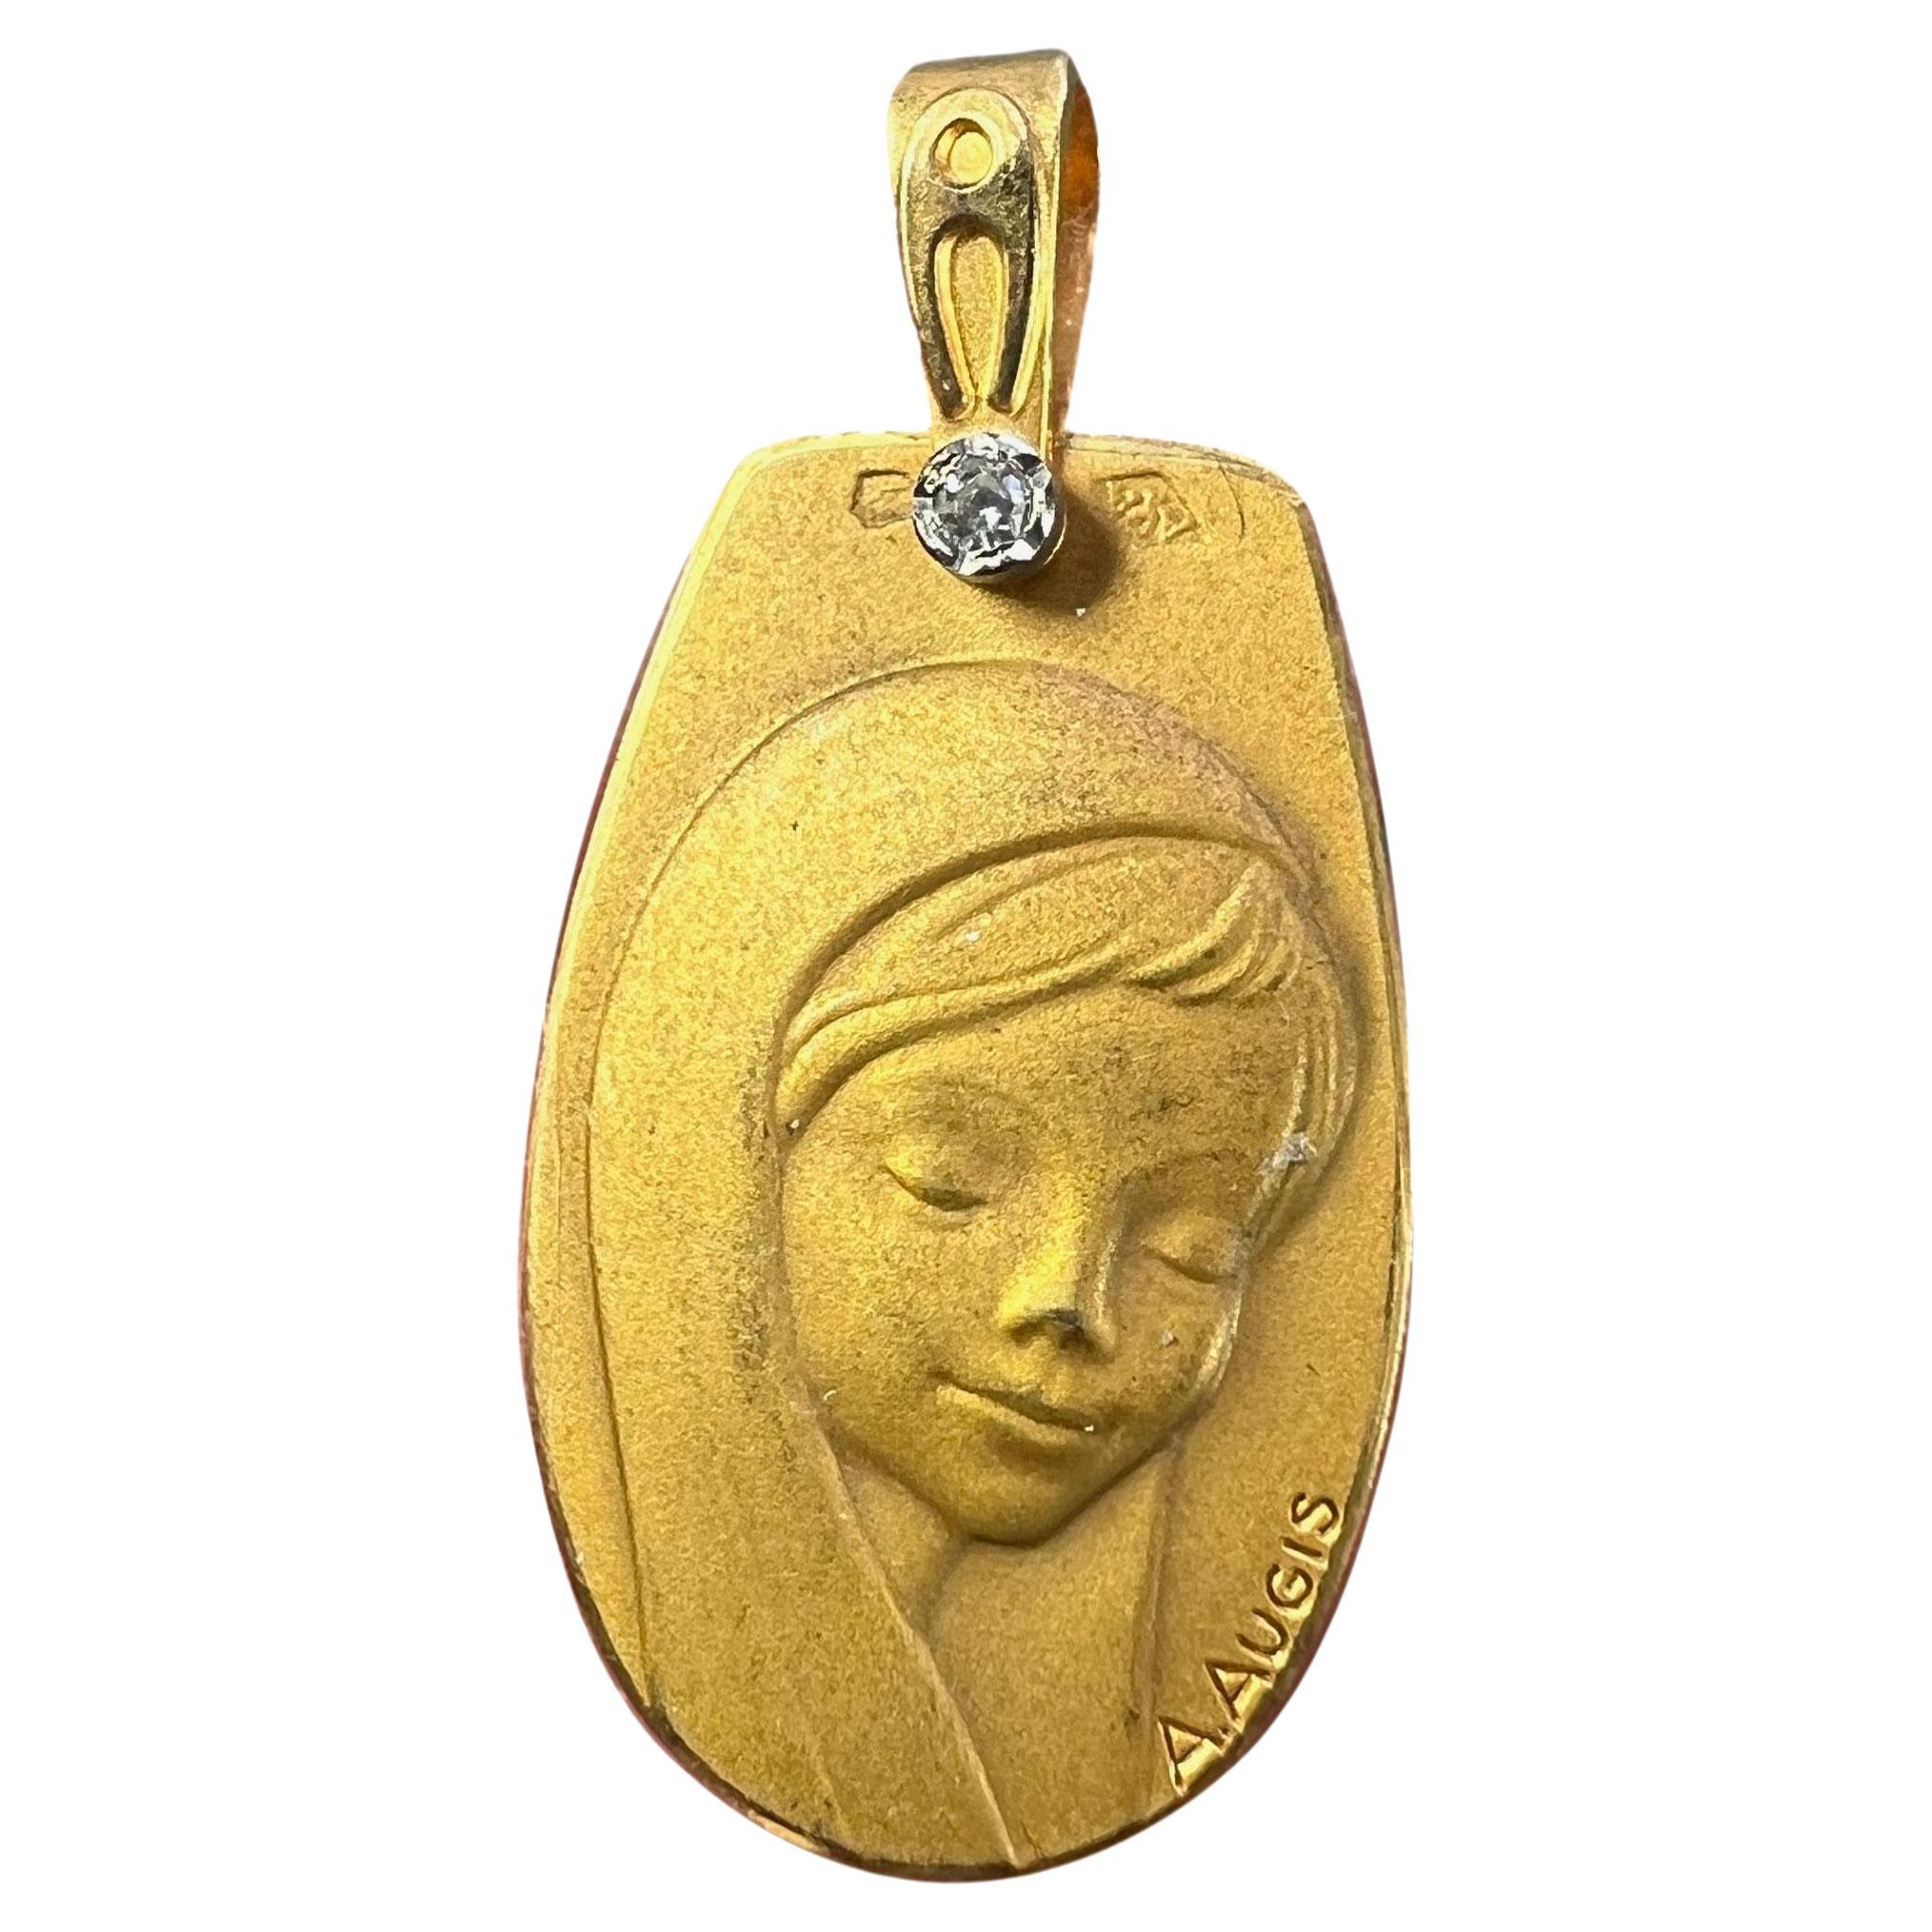 French Augis Virgin Mary 18K Yellow Gold Diamond Religious Medal Pendant For Sale